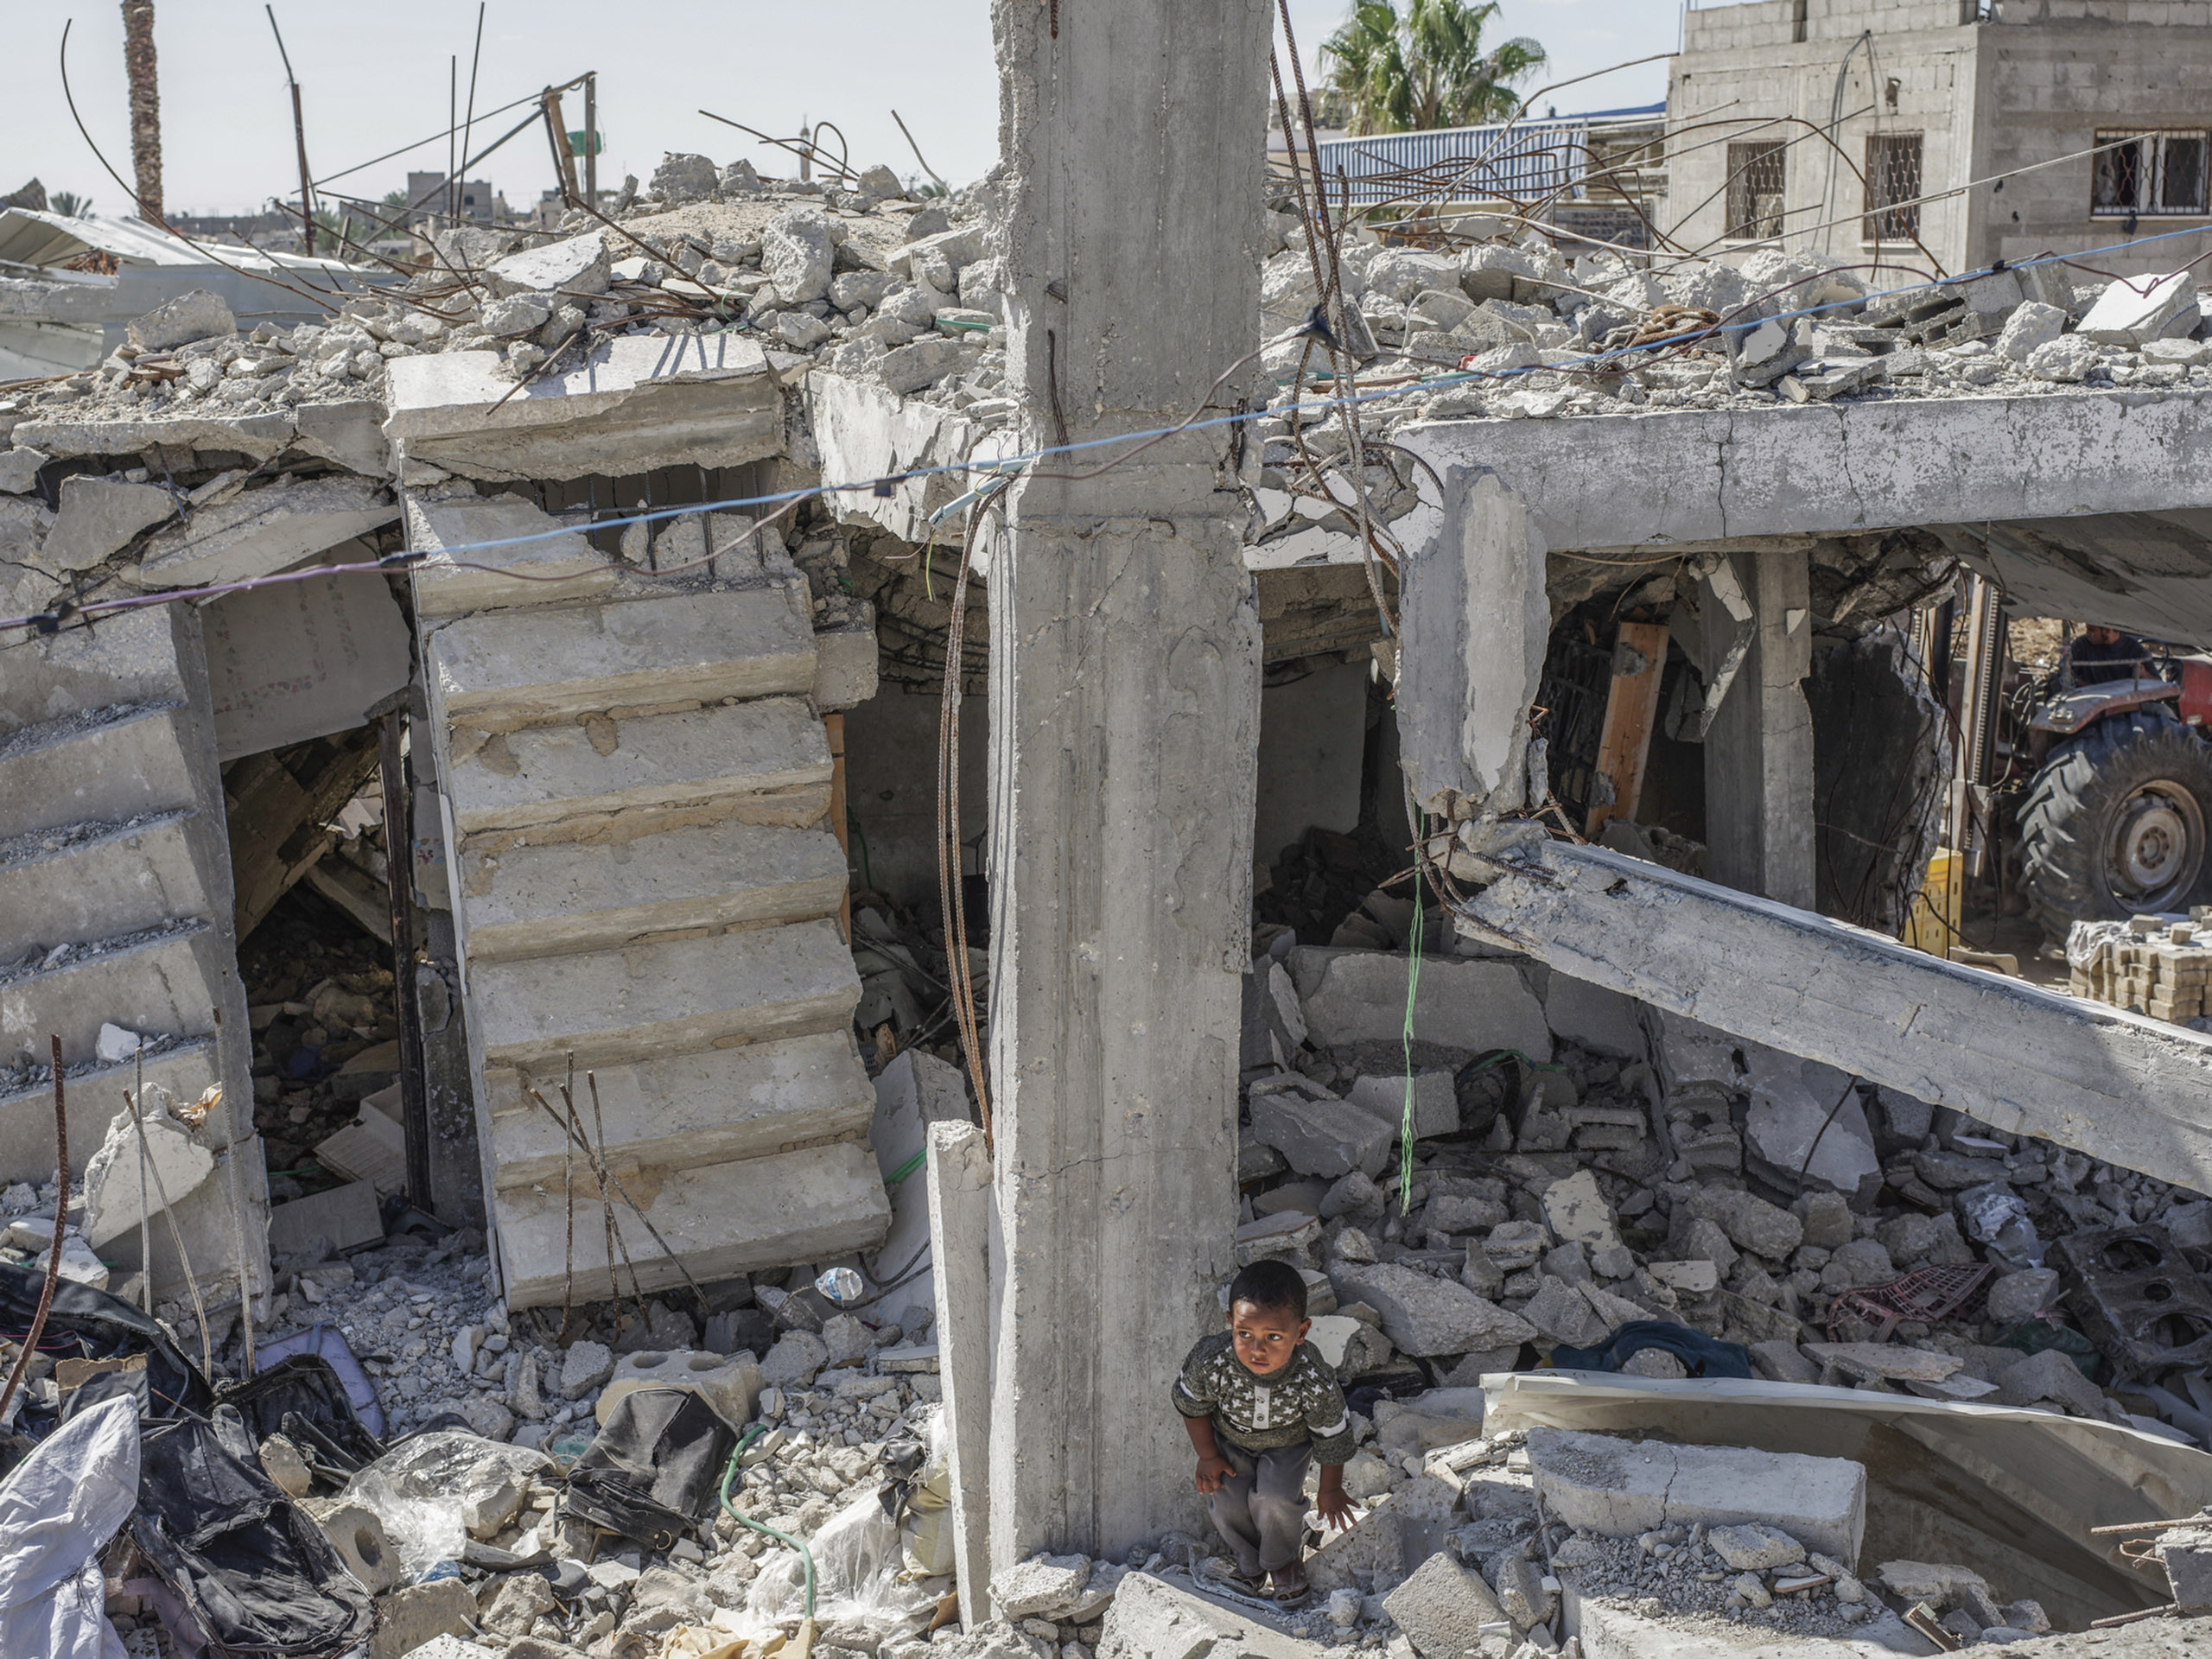 A child in the ruins of his home in the destroyed neighborhood of Beit Hanoun, Gaza.